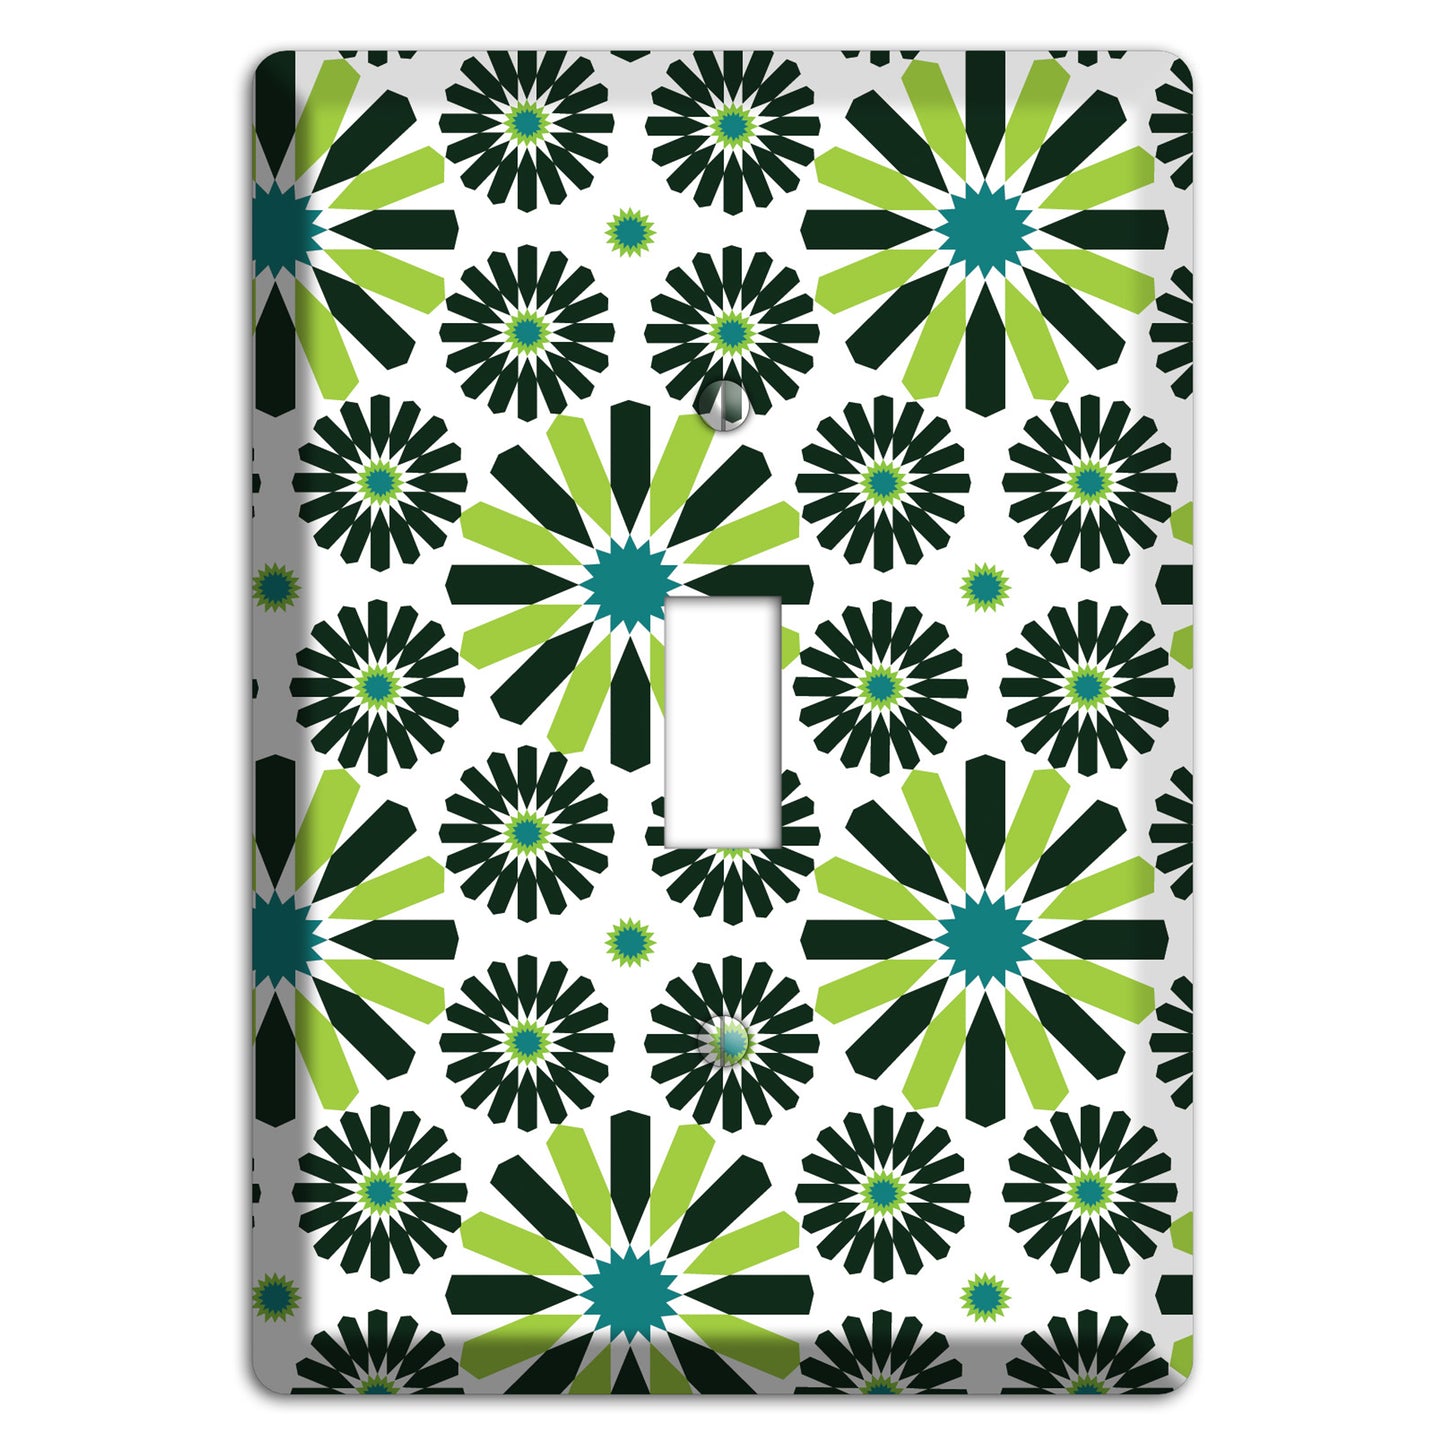 Lime and Teal Scandinavian Floral Cover Plates